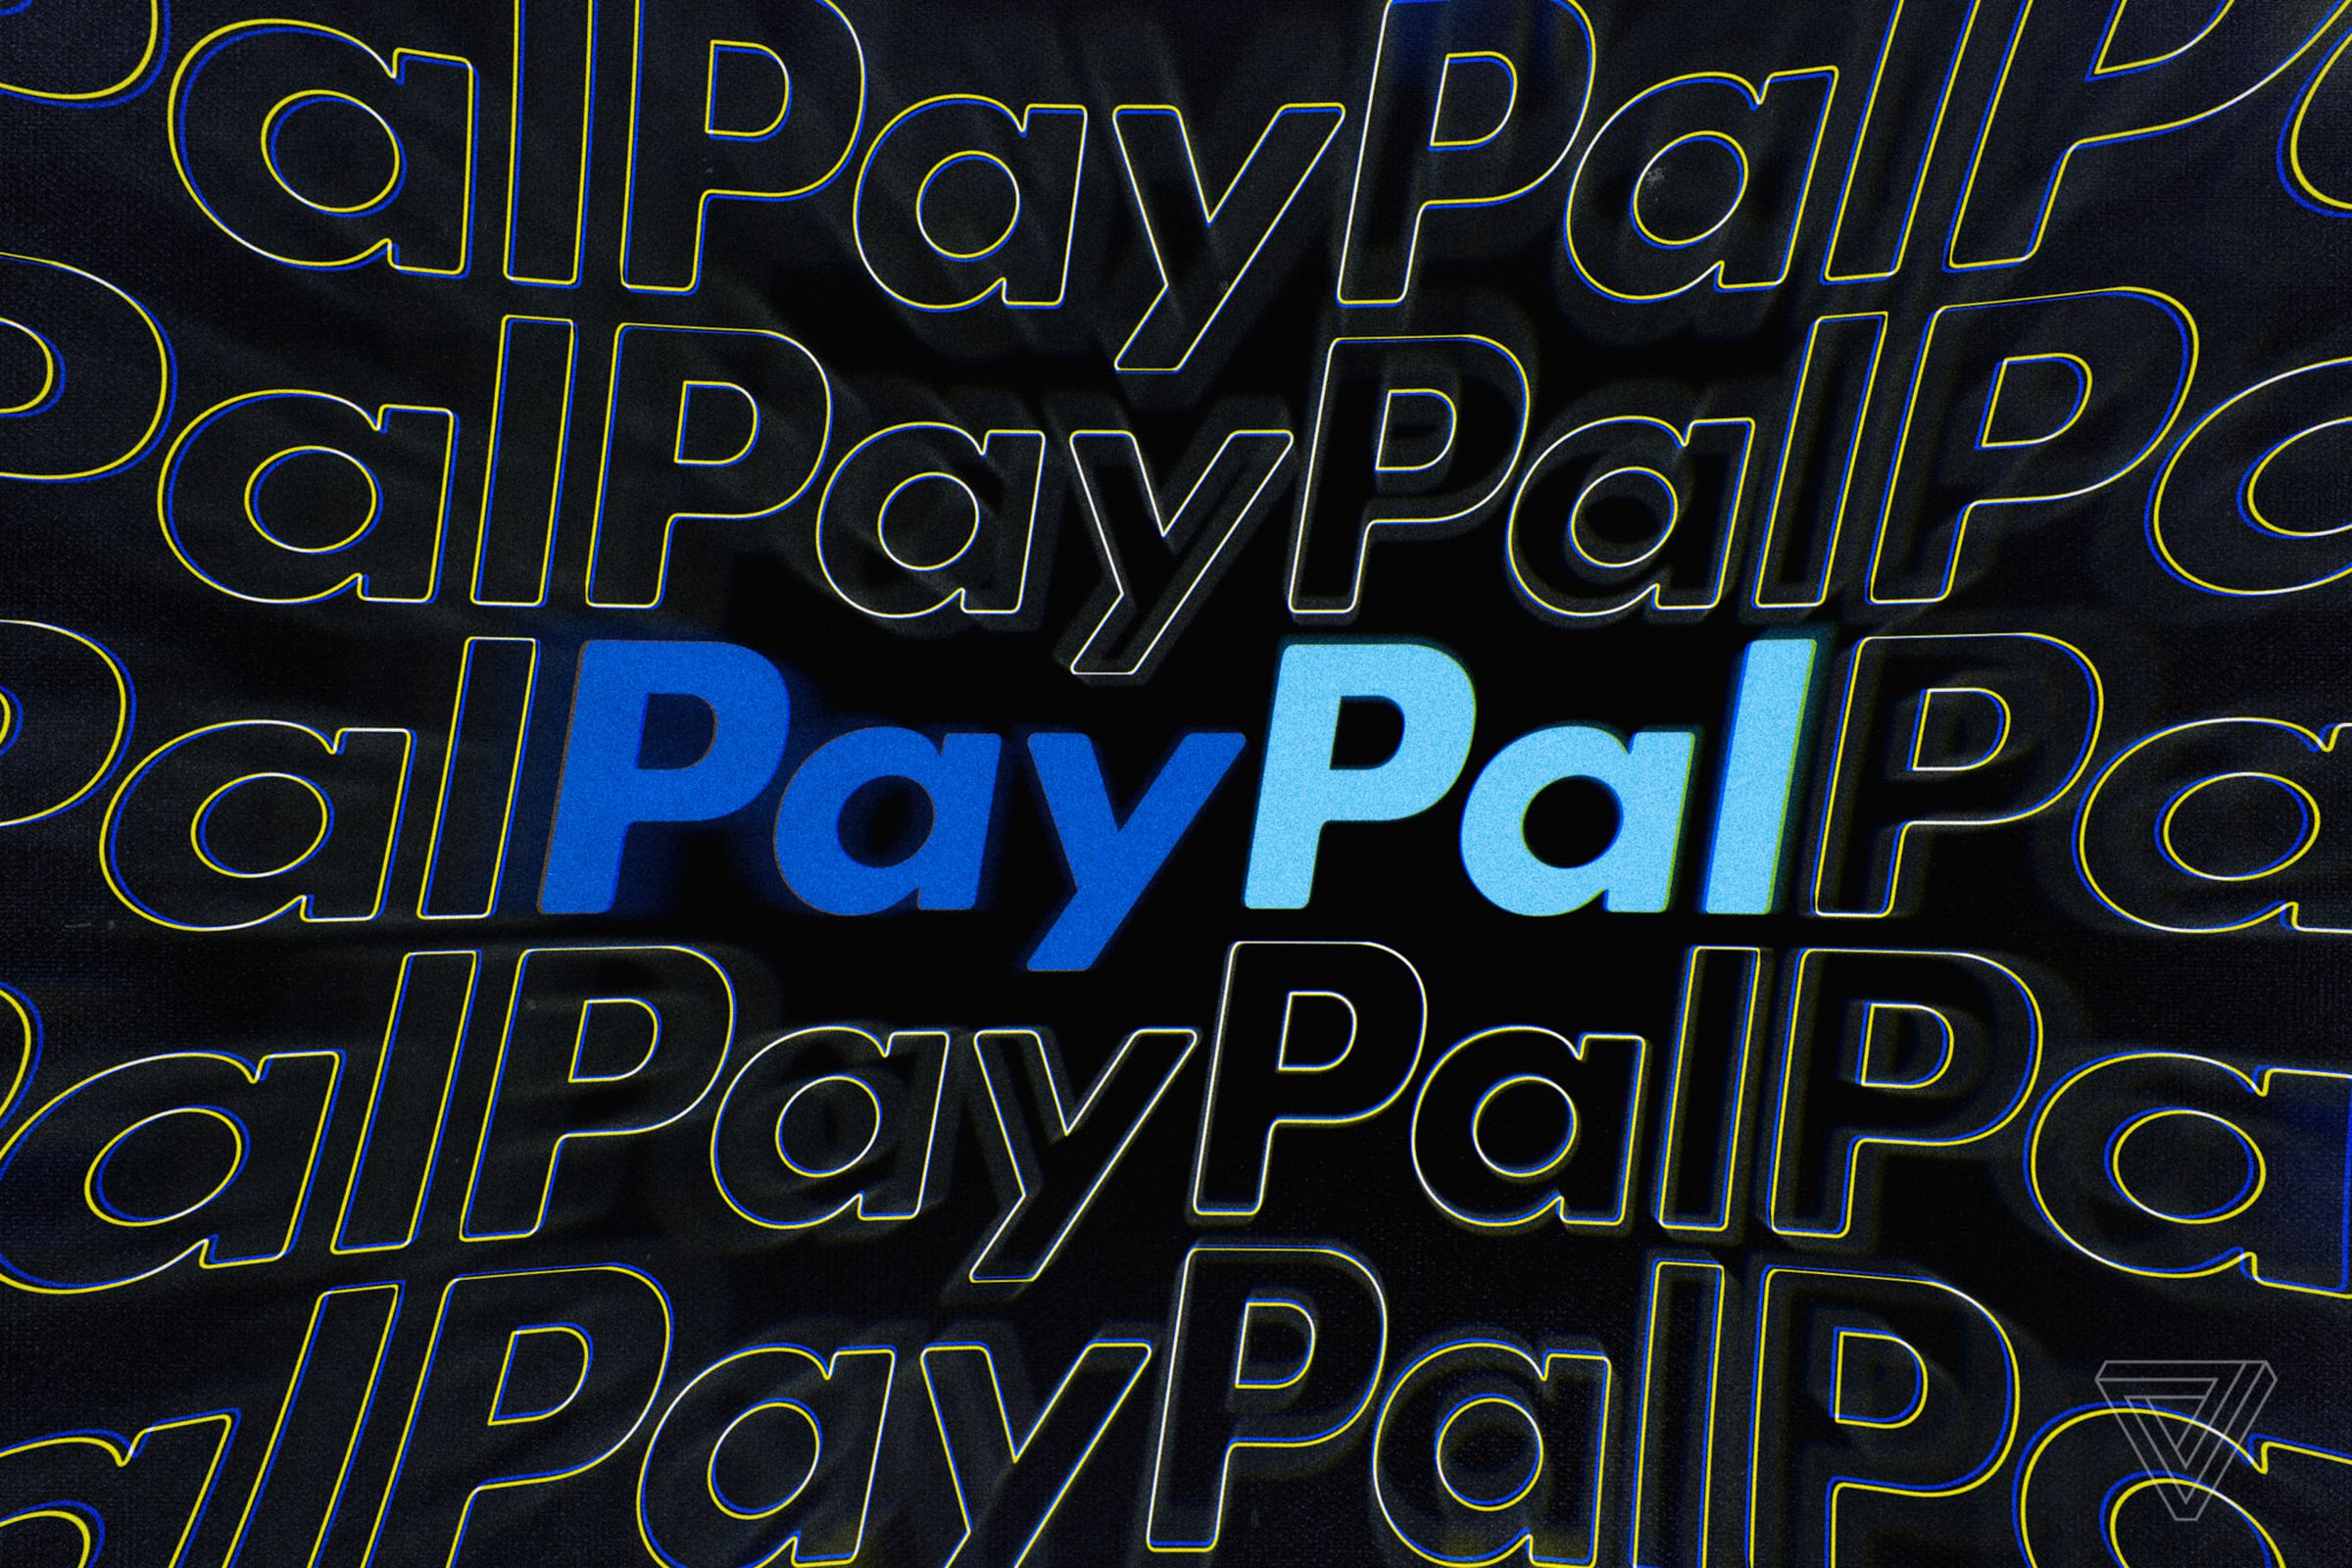 An image of the PayPal spelled-out logo on a background of black and white outlines of the same.